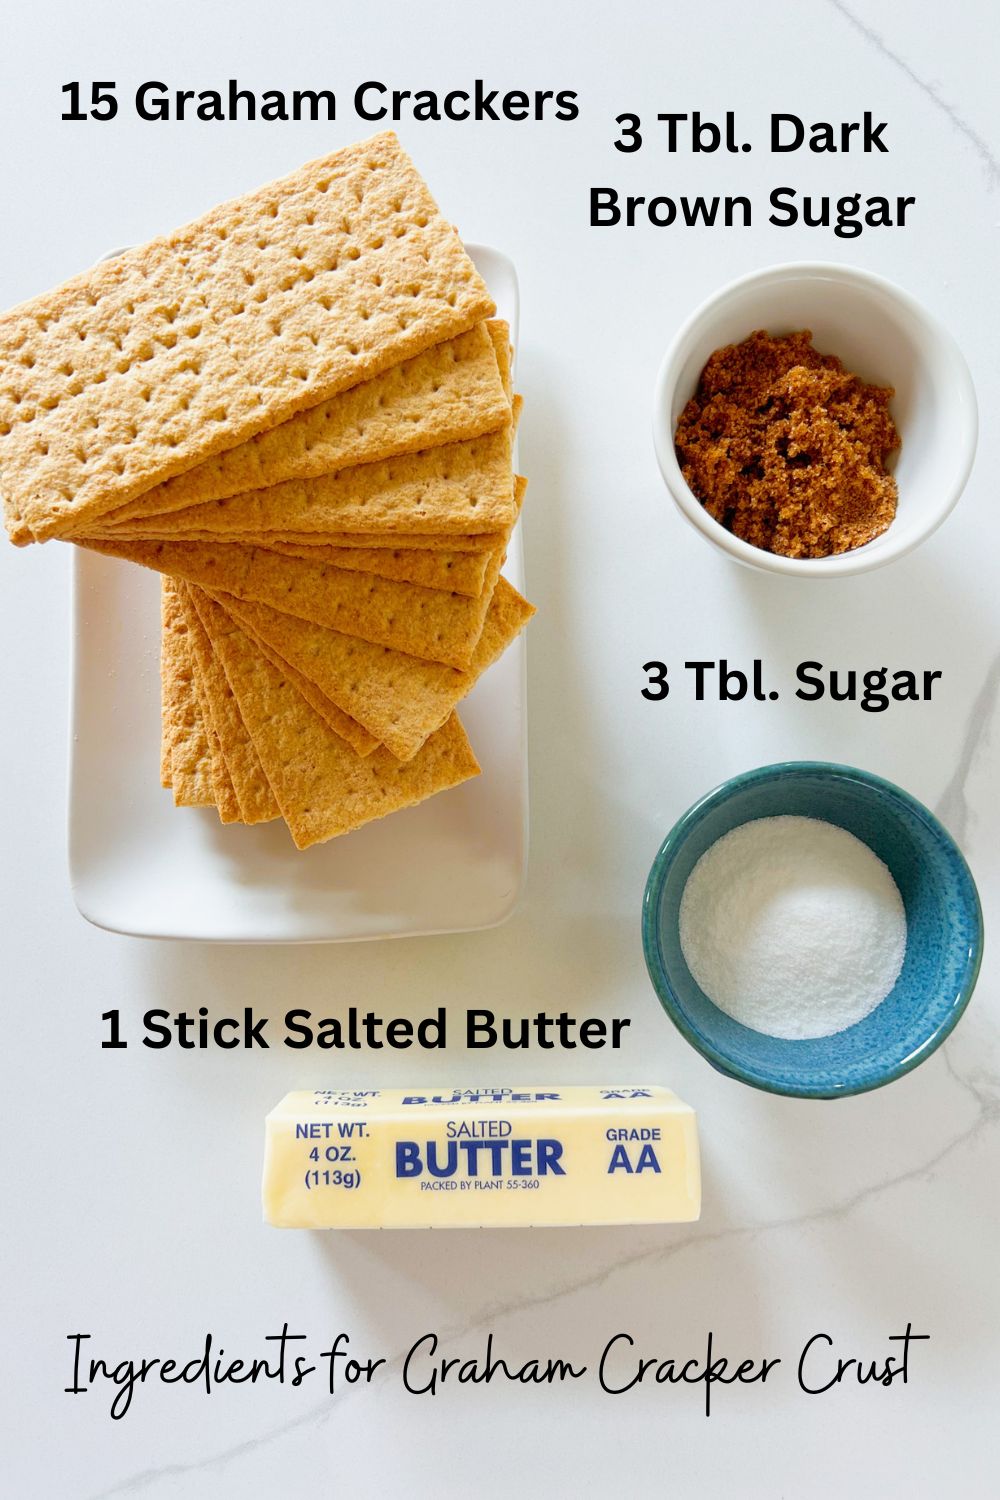 Ingredients for graham cracker crust recipe: graham crackers, brown sugar, white sugar and a stick of salted butter